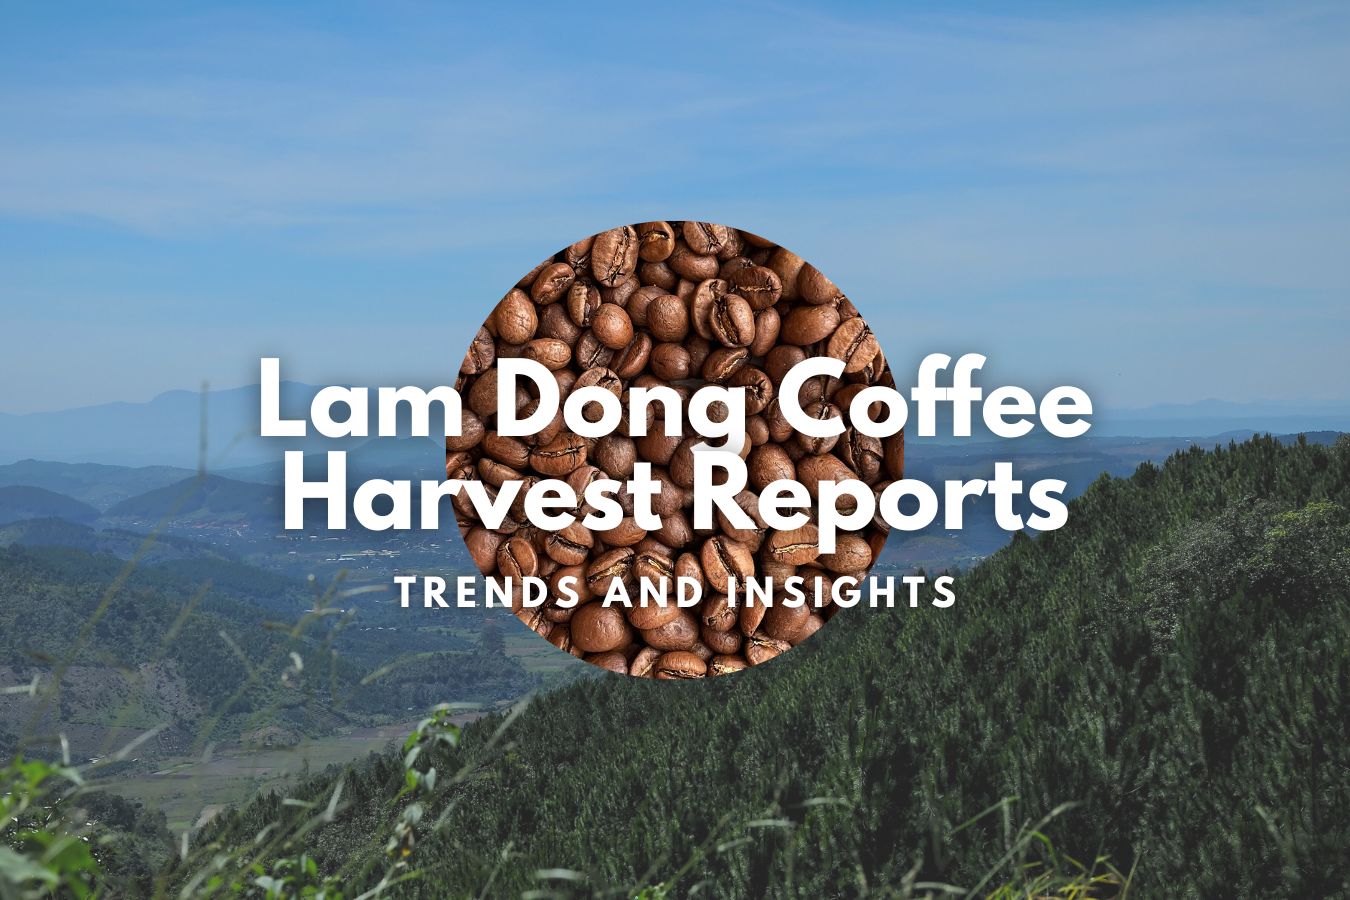 Lam Dong Coffee Harvest Reports Trends and Insights